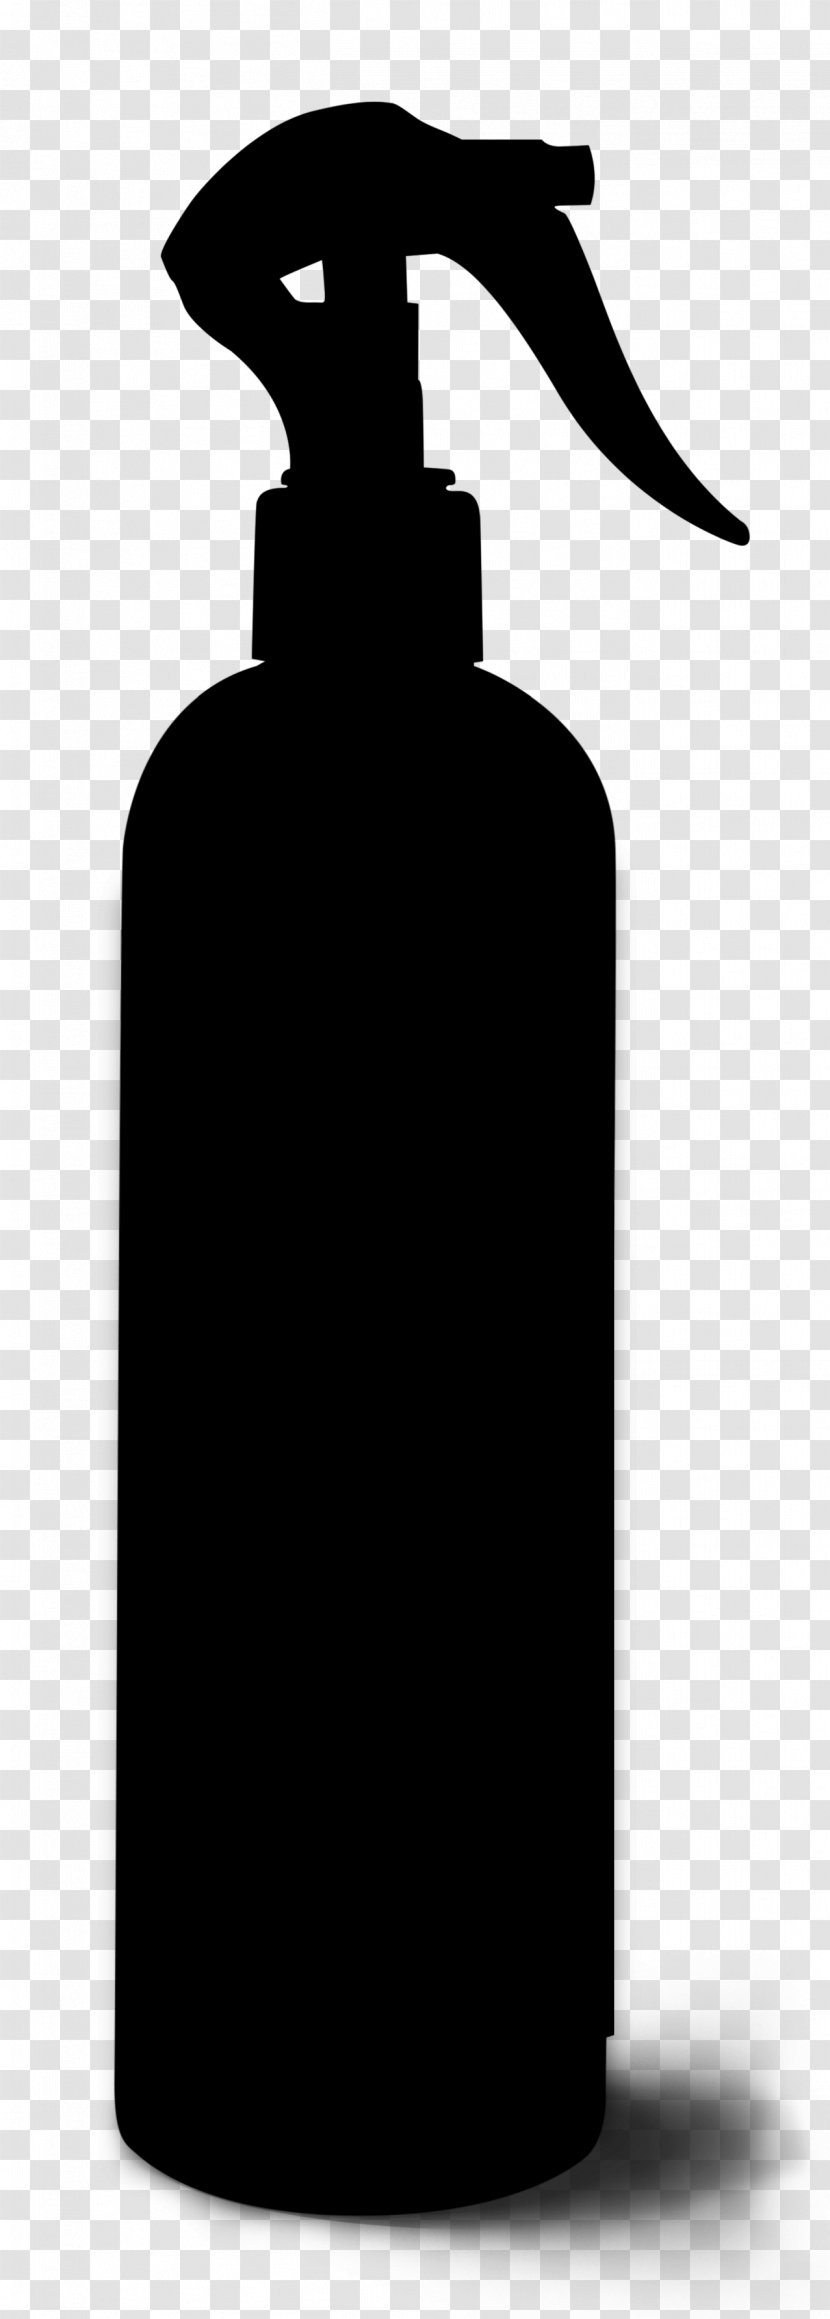 Black & White - Home Accessories - M Product Design Bottle Silhouette Transparent PNG